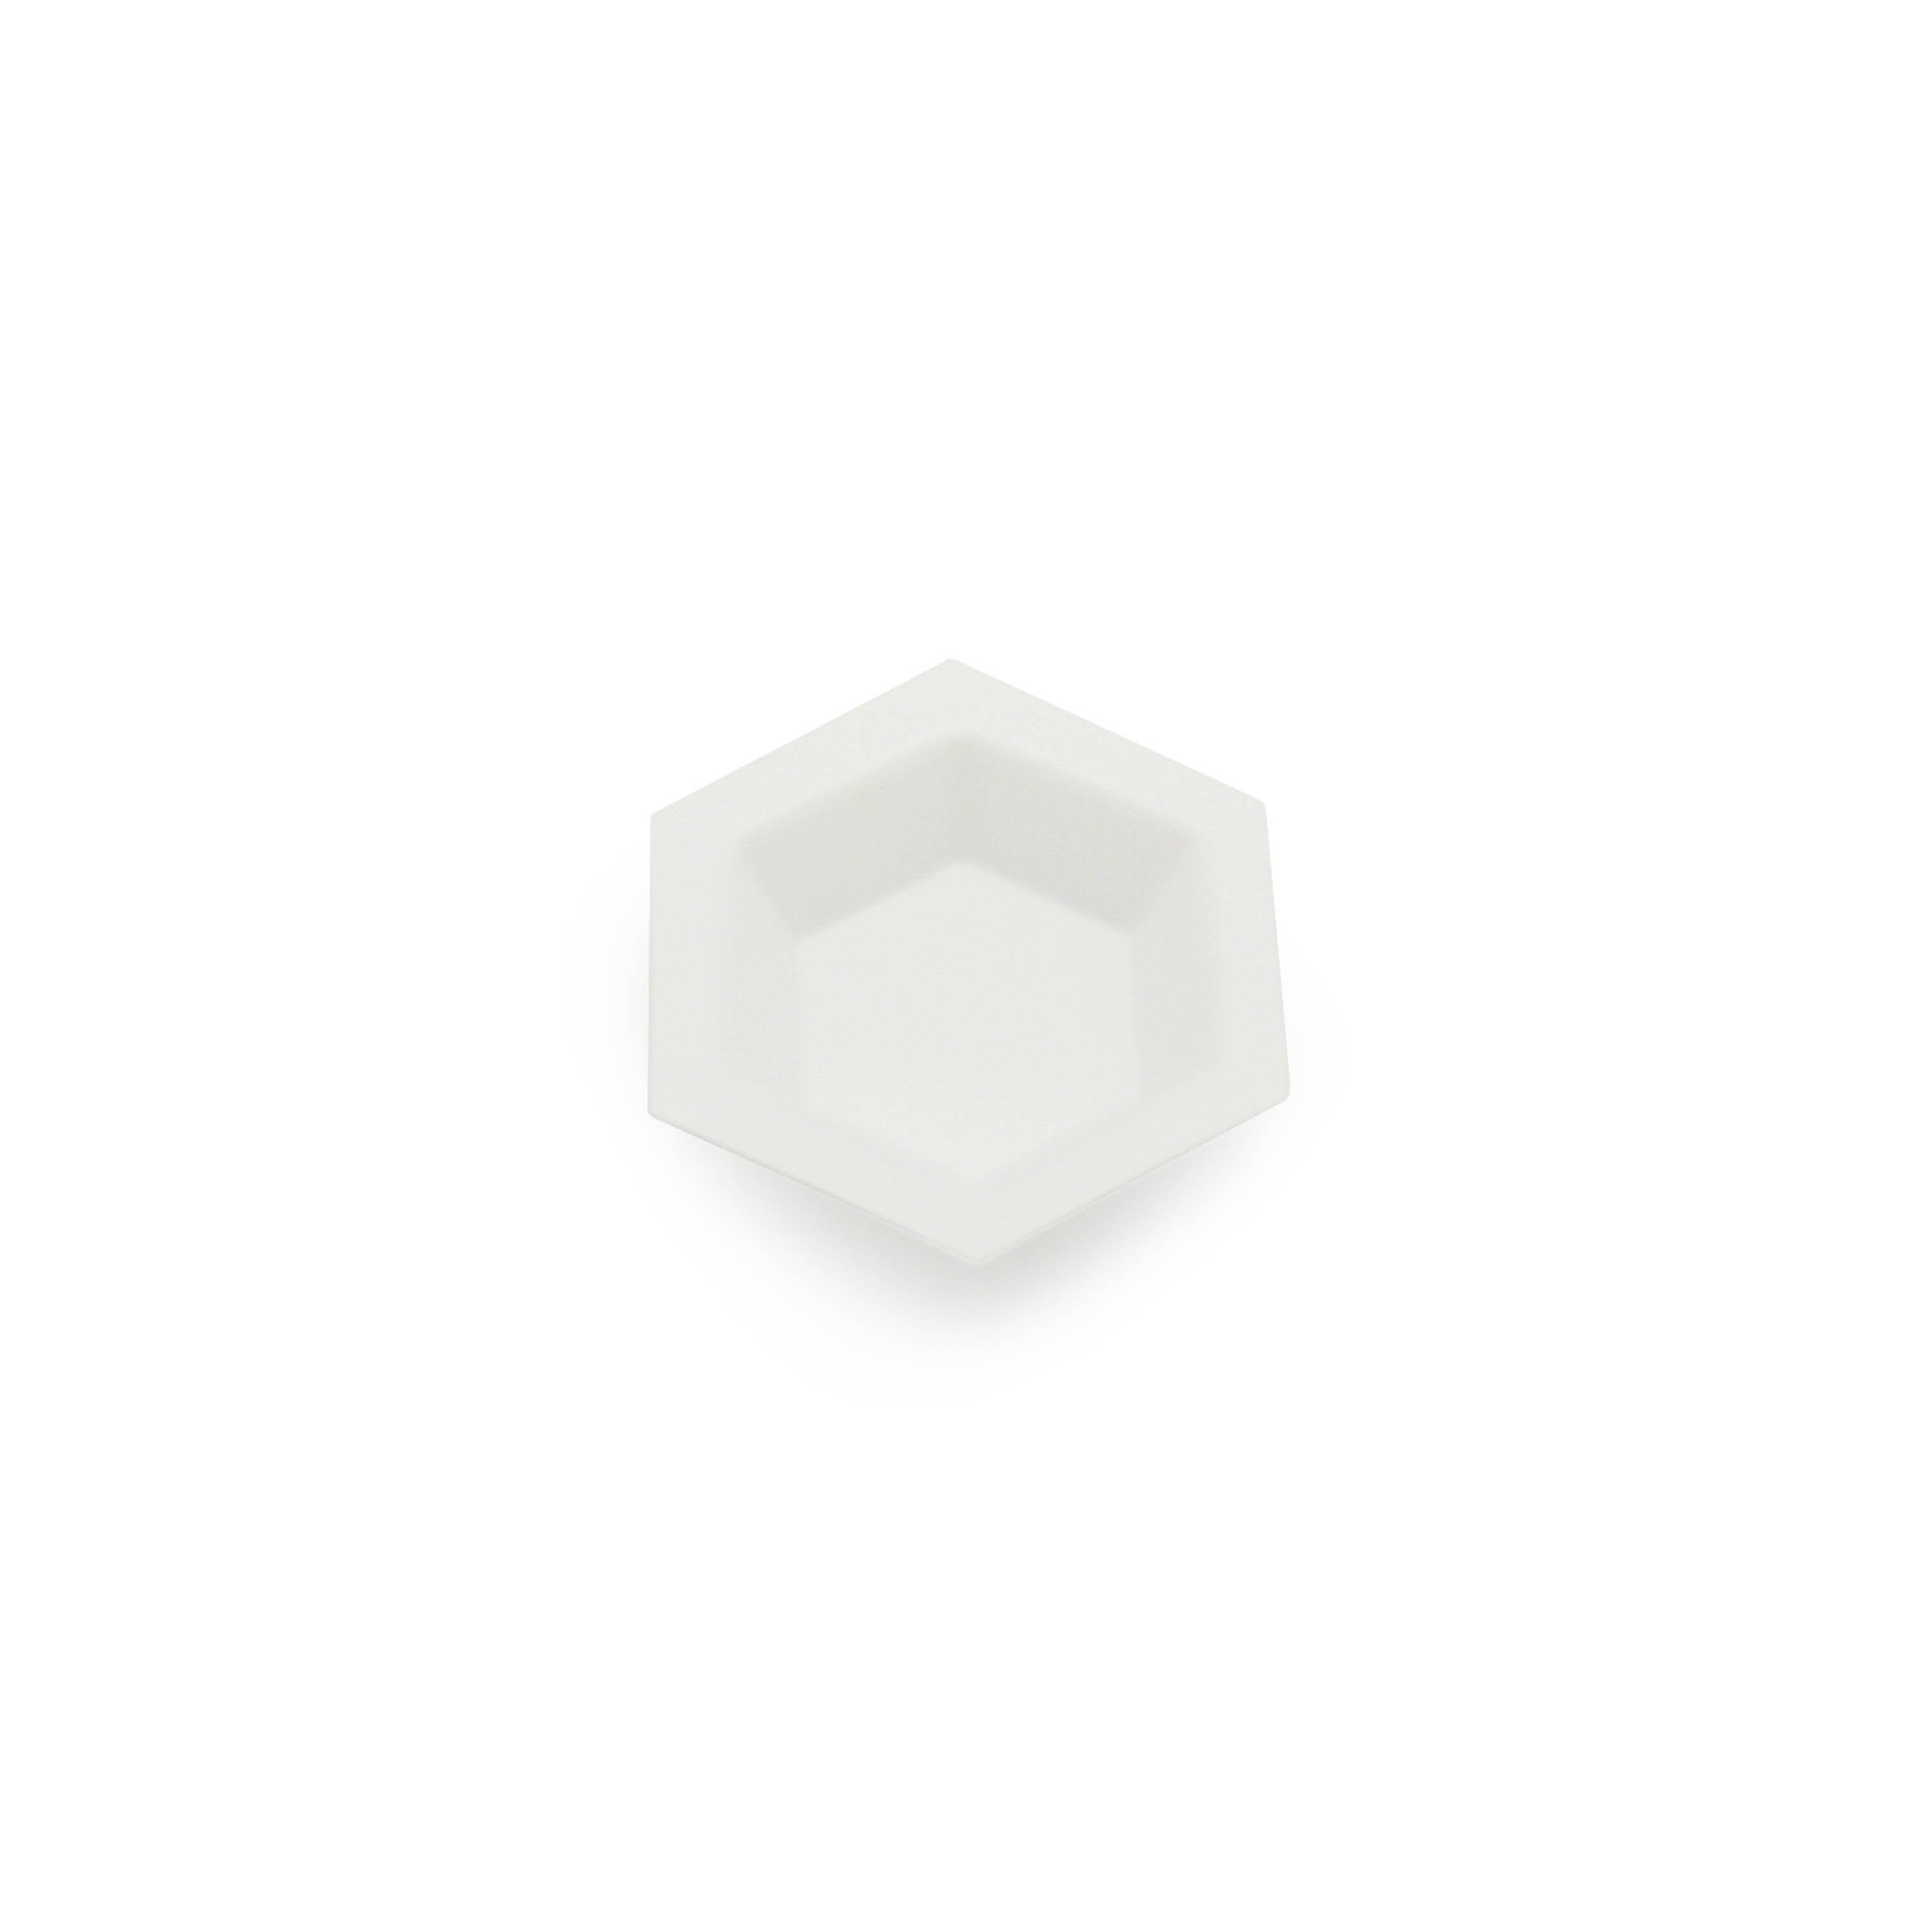 Sterile Hexagonal Weighing Boat - White, Antistatic, Small 6mL